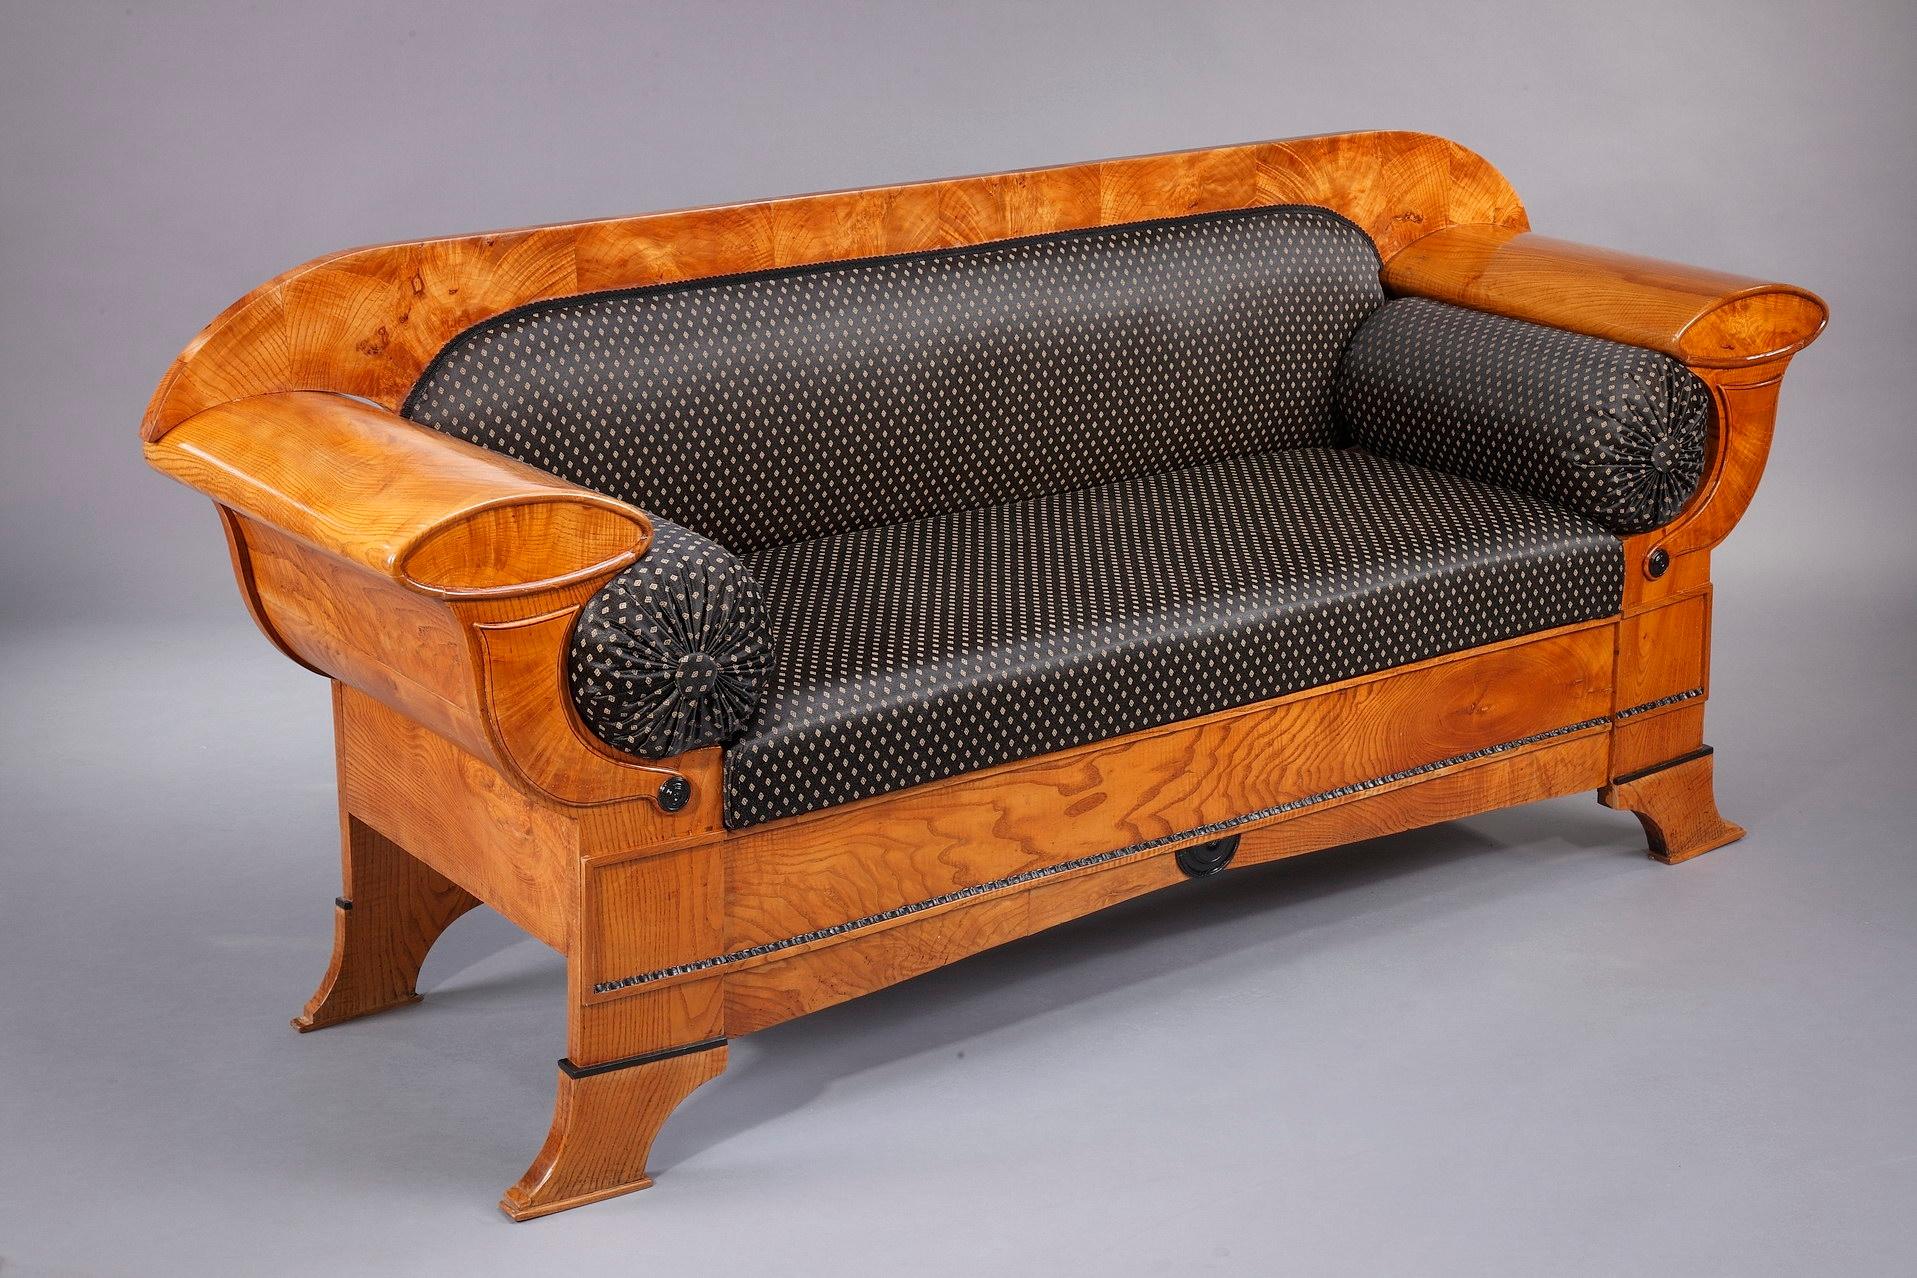 This Vienna Biedermeier sofa is crafted of oak veneer in Austria in the 1830s. Carved with elegant curving lines and cornucopia, it is a masterpiece of the Biedermeier style (1815-1848). The settee features an intricately detailed decoration of